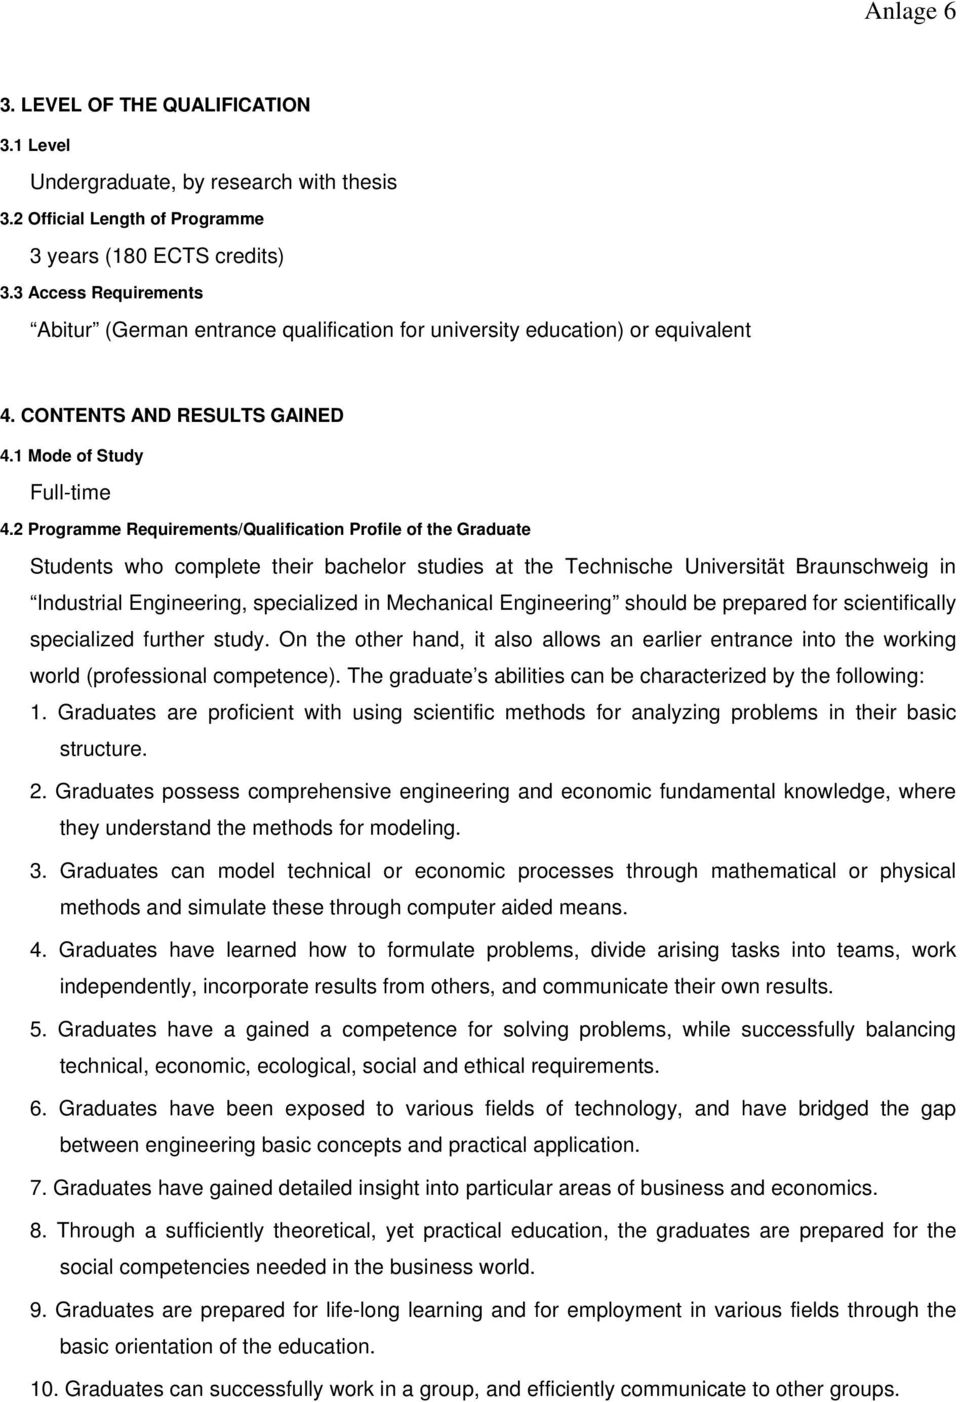 2 Programme Requirements/Qualification Profile of the Graduate Students who complete their bachelor studies at the Technische Universität Braunschweig in Industrial Engineering, specialized in